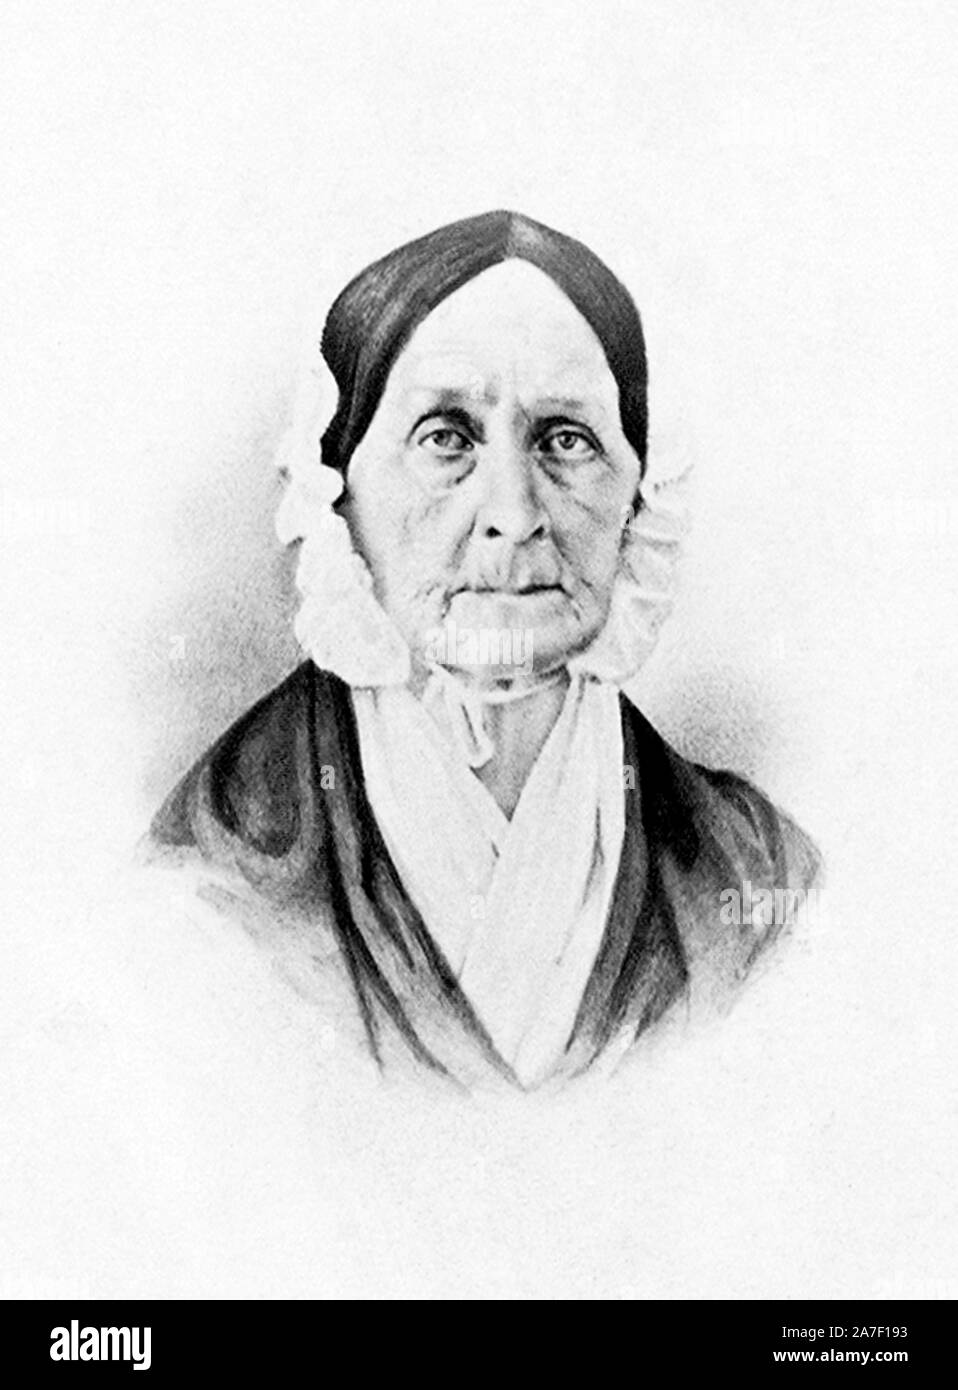 Vintage portrait photo of Barbara Frietchie (1766 – 1862), the elderly Unionist who became part of American Civil War folklore thanks to a popular poem by John Greenleaf Whittier. Legend has it that Frietchie (also spelt Fritchie or Frietschie) waved a Union flag from her attic window at occupying Confederate forces in Frederick, Maryland, in September 1862 and declared: 'Shoot, if you must, this old gray head, but spare your country's flag.' Photo circa 1862 by Brady & Co. Stock Photo